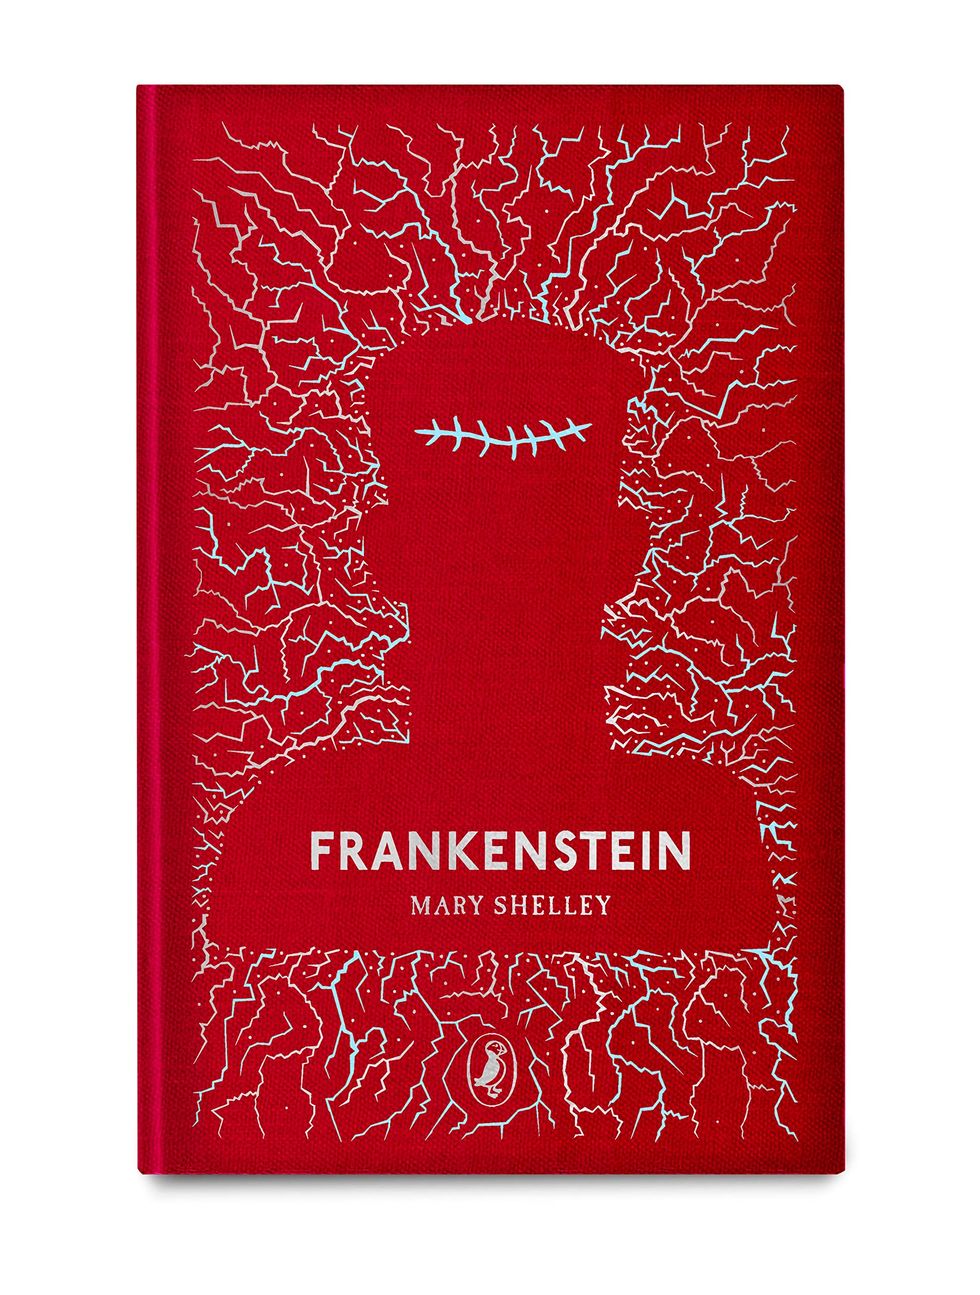 frankenstein by mary shelley cover puffin edition with a bold red cover and an outline of the monster with light blue electric charges coming from him